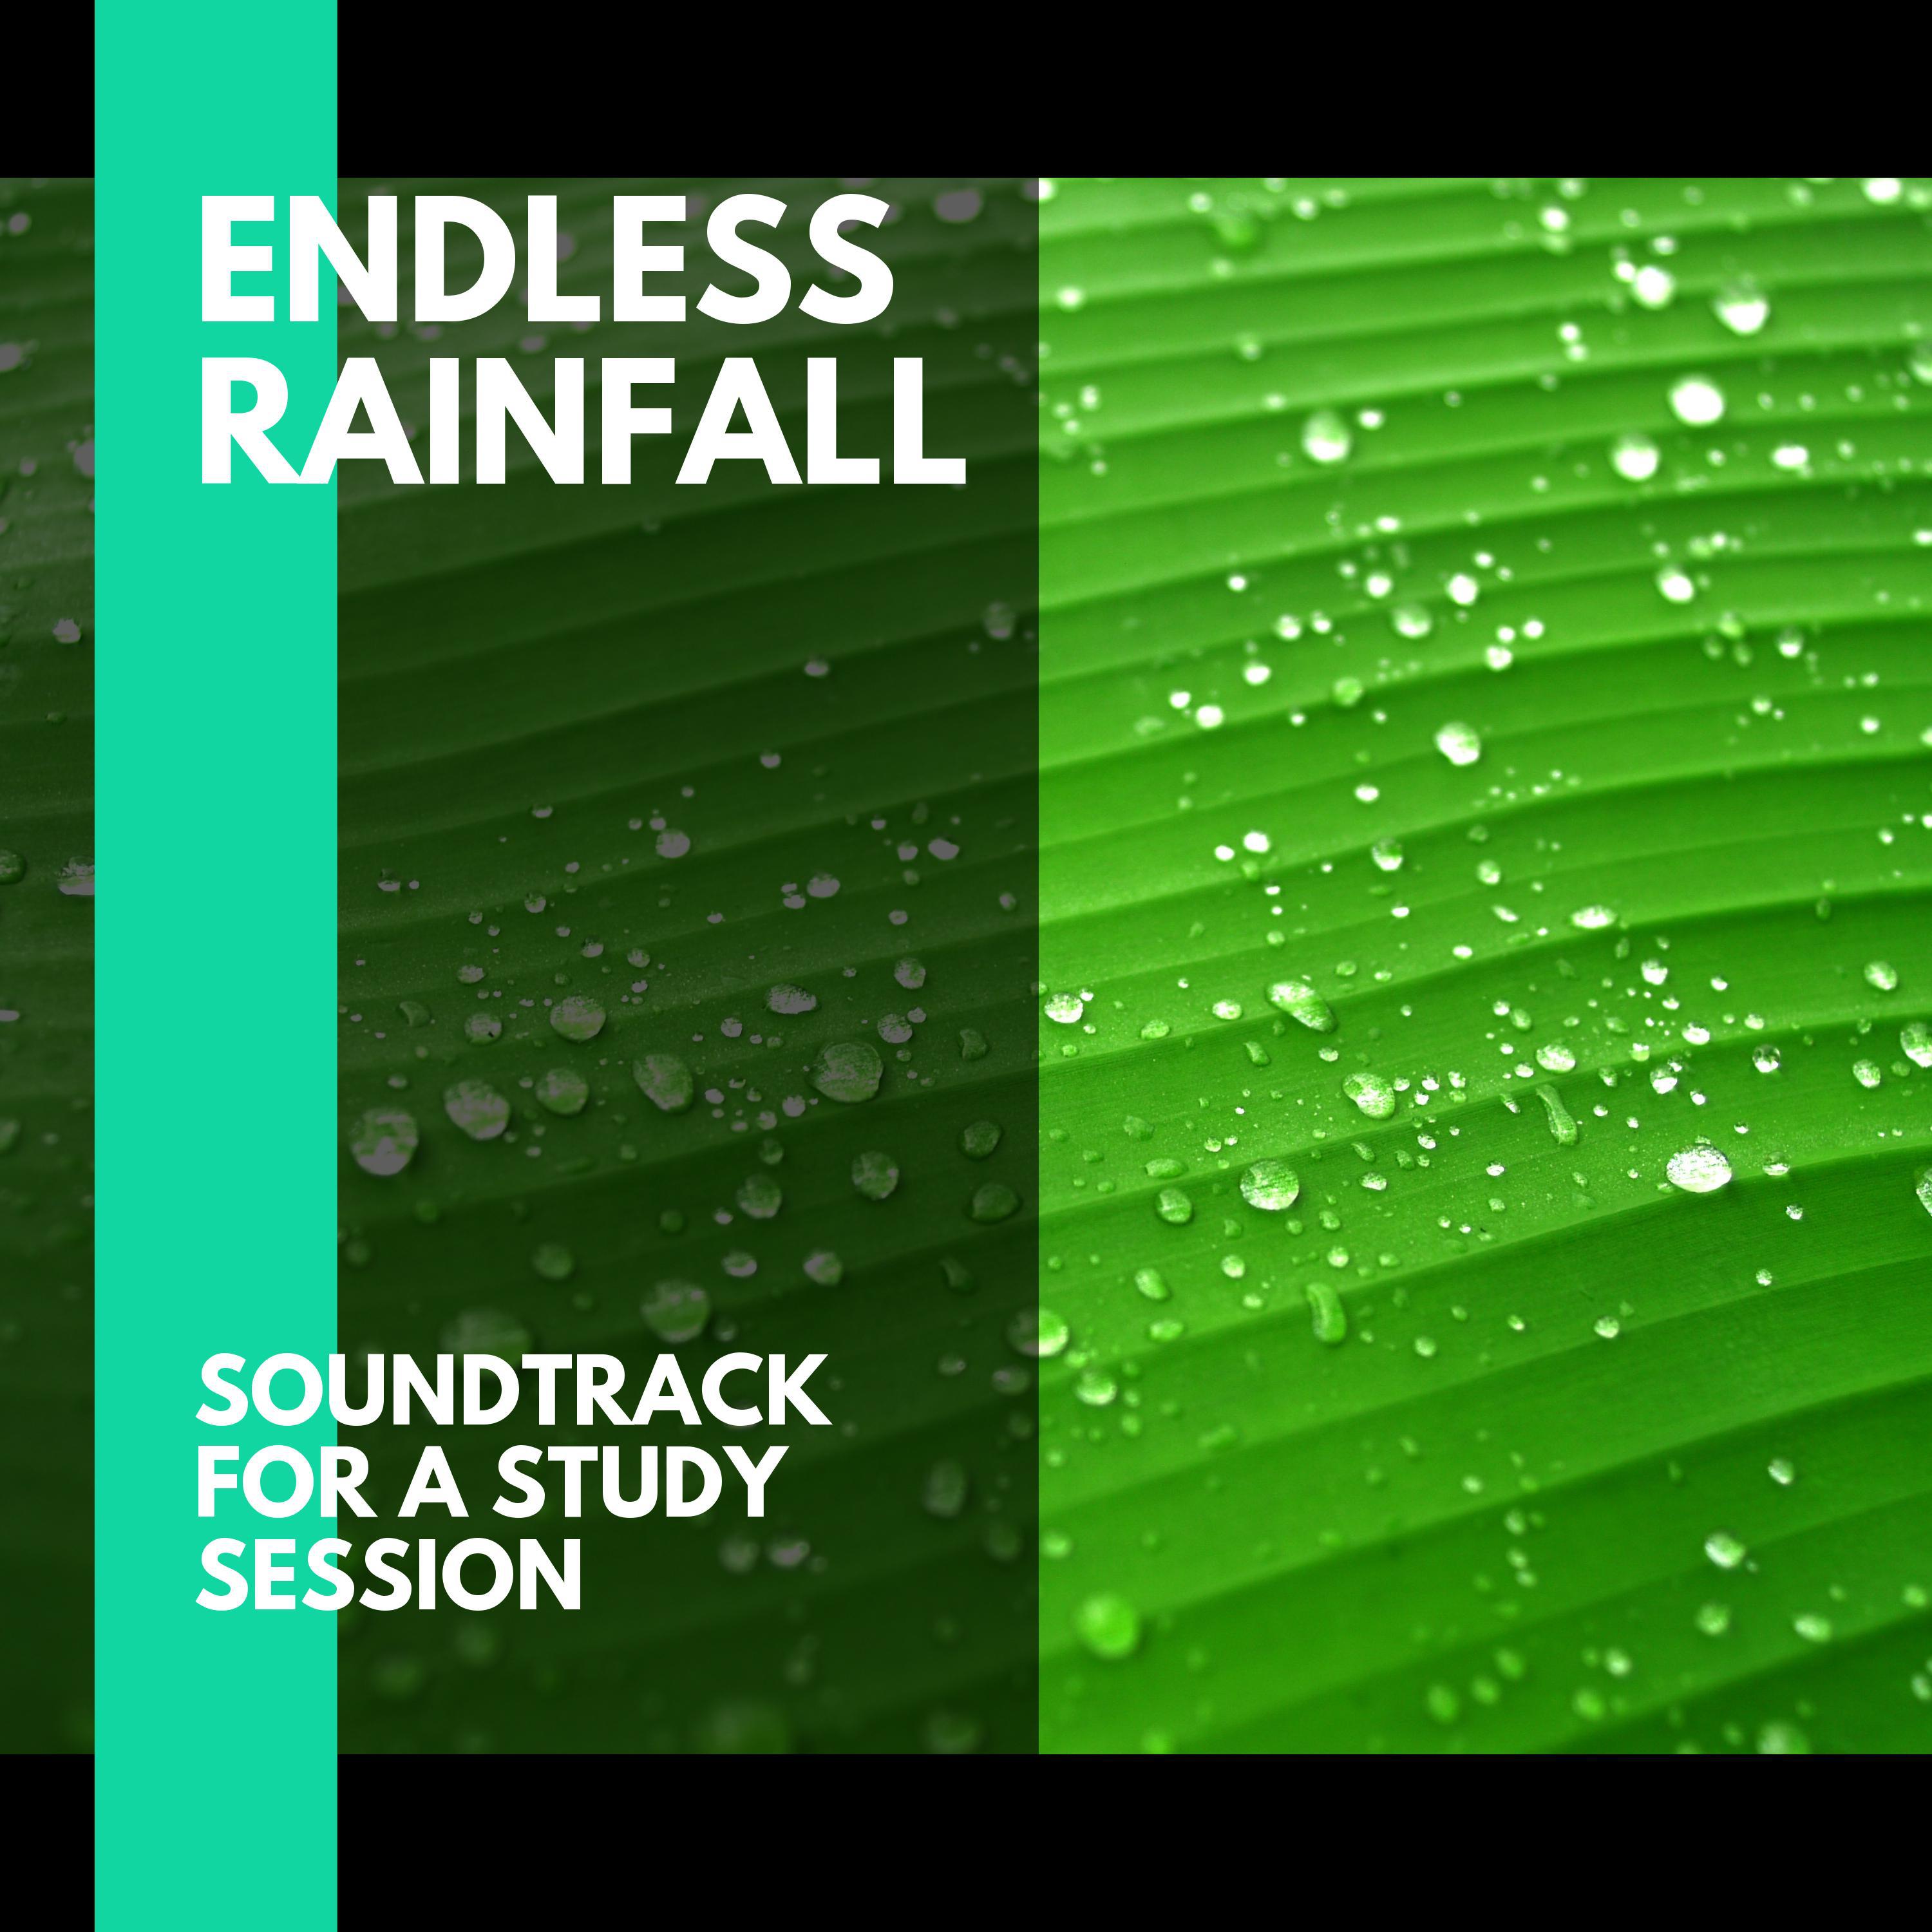 Rain Sounds - Insect Hum as Backgroudn Music